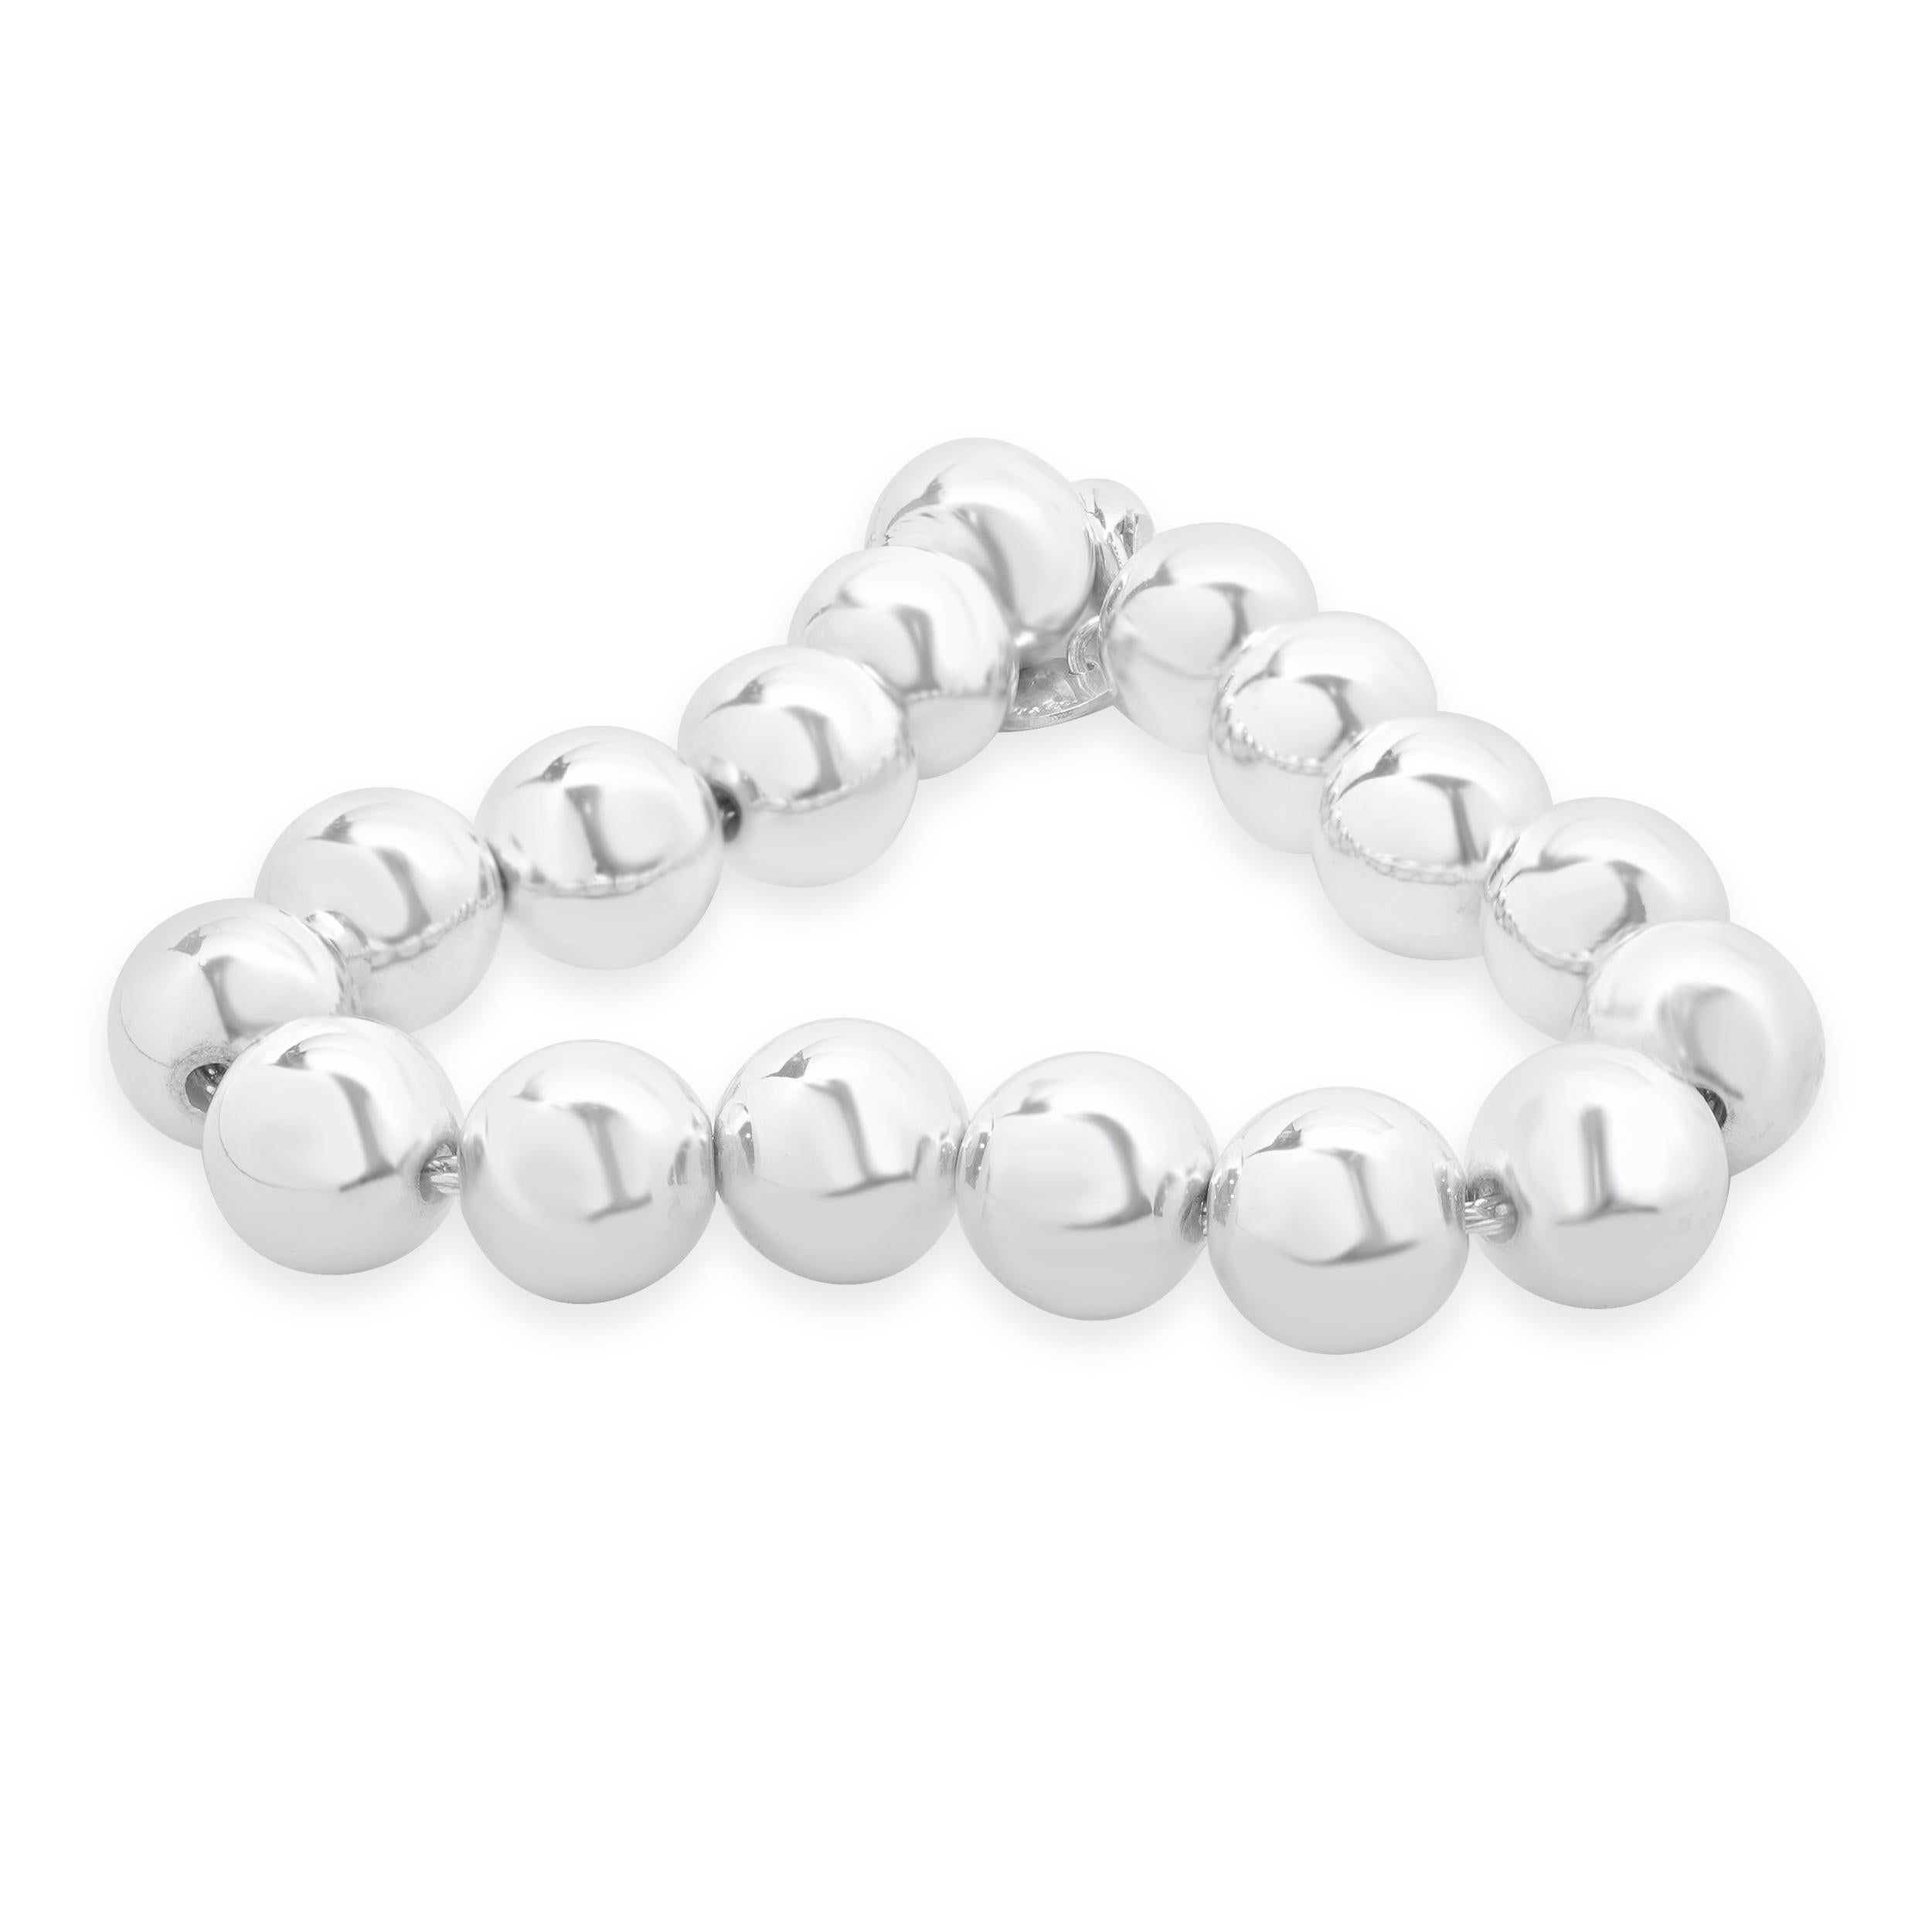 Designer: Tiffany & Co. 
Material: sterling silver
Dimensions: bracelet measures 7.25-inches in length
Weight: 20.00 grams
